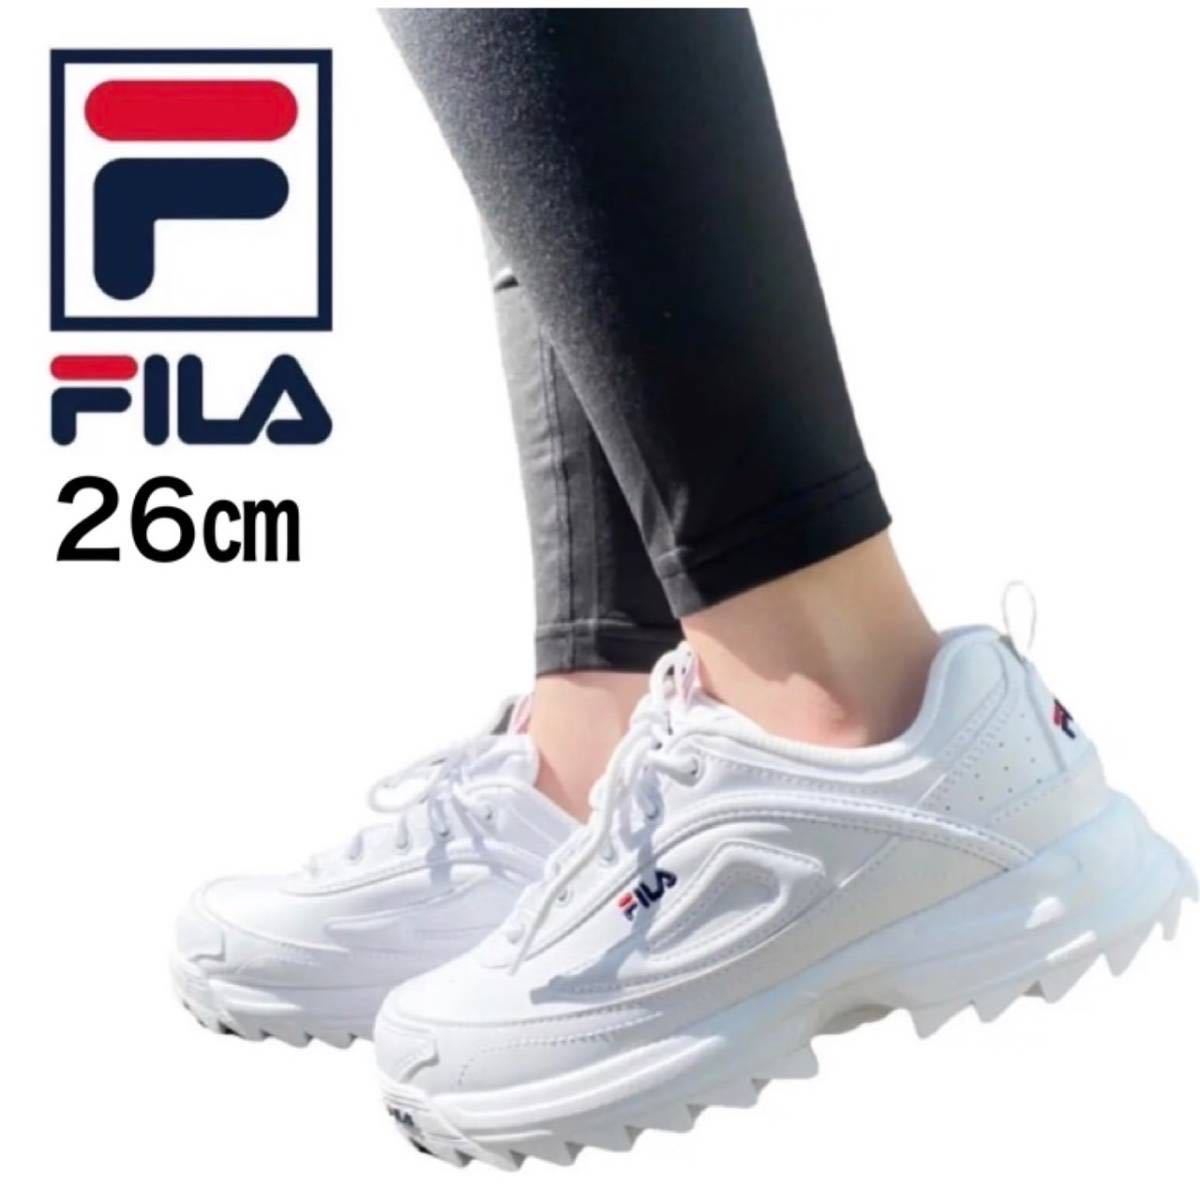 * regular goods new goods *FILA DISTORTER filler shoes shoes F51700125 sneakers dist -ta- thickness bottom sole lady's white JP26.0cm